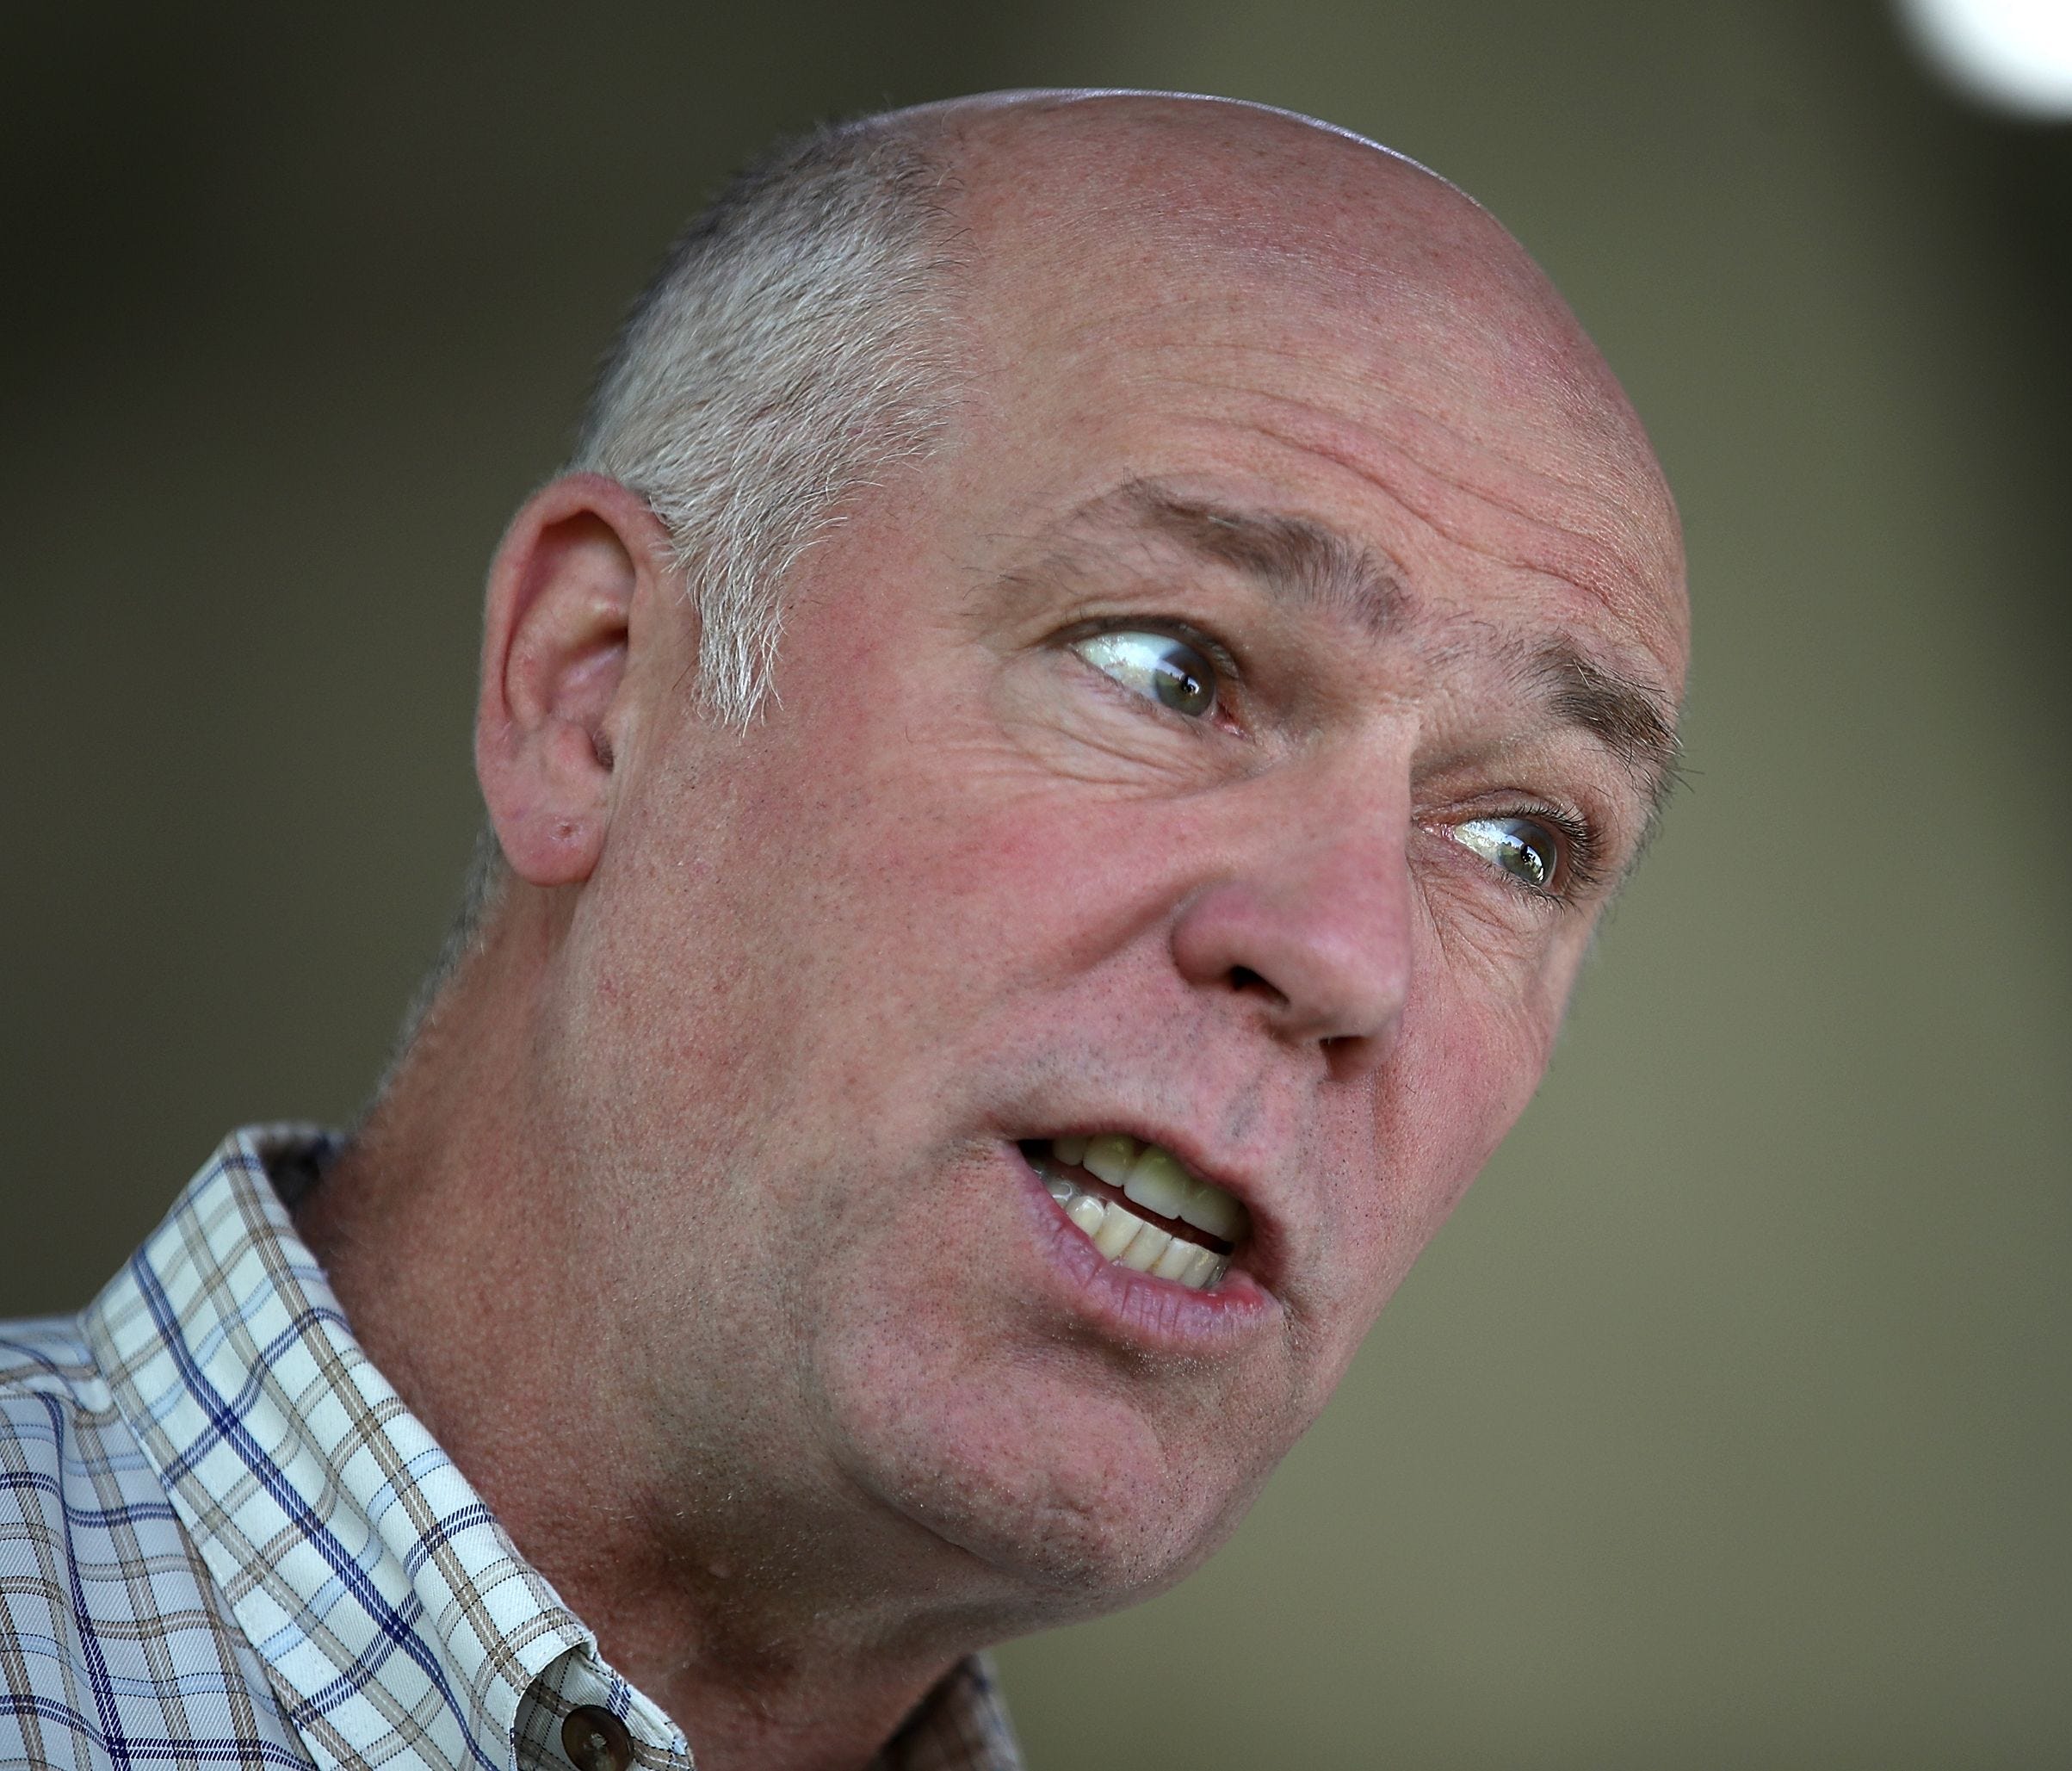 Republican congressional candidate Greg Gianforte during a campaign stop in Great Falls, Montana.